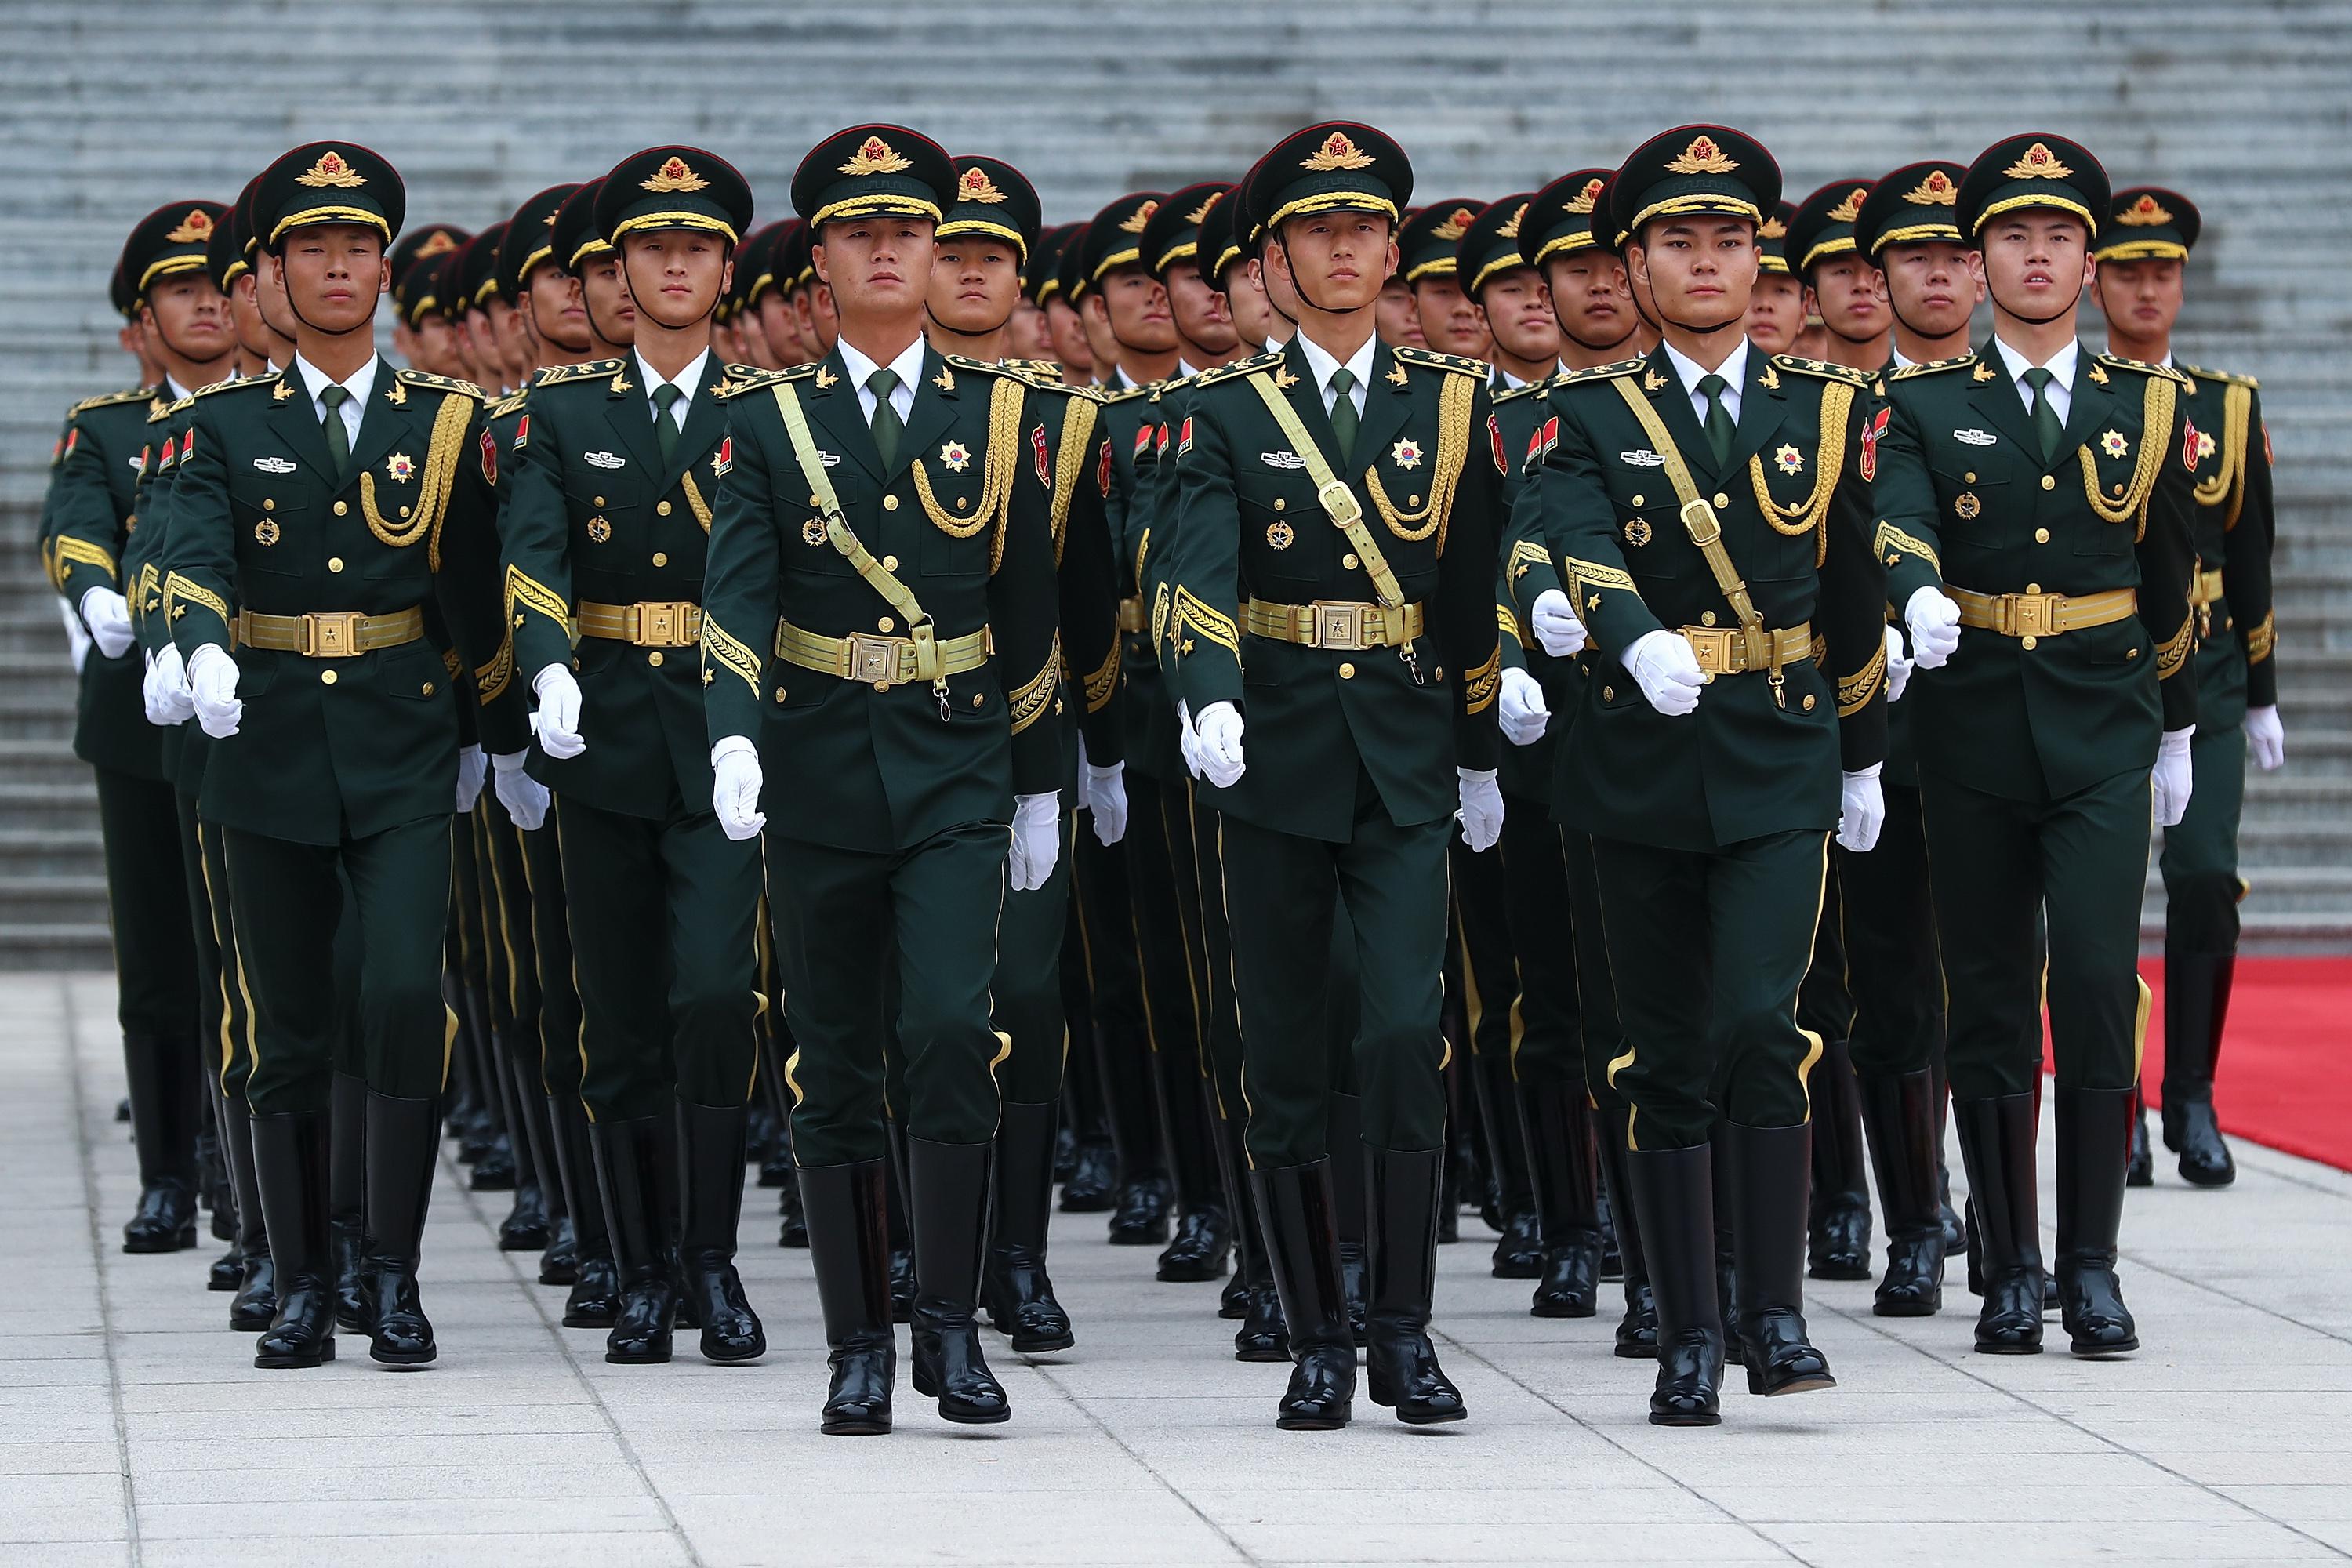 Chinese military honor guards lined up in formation and uniform 